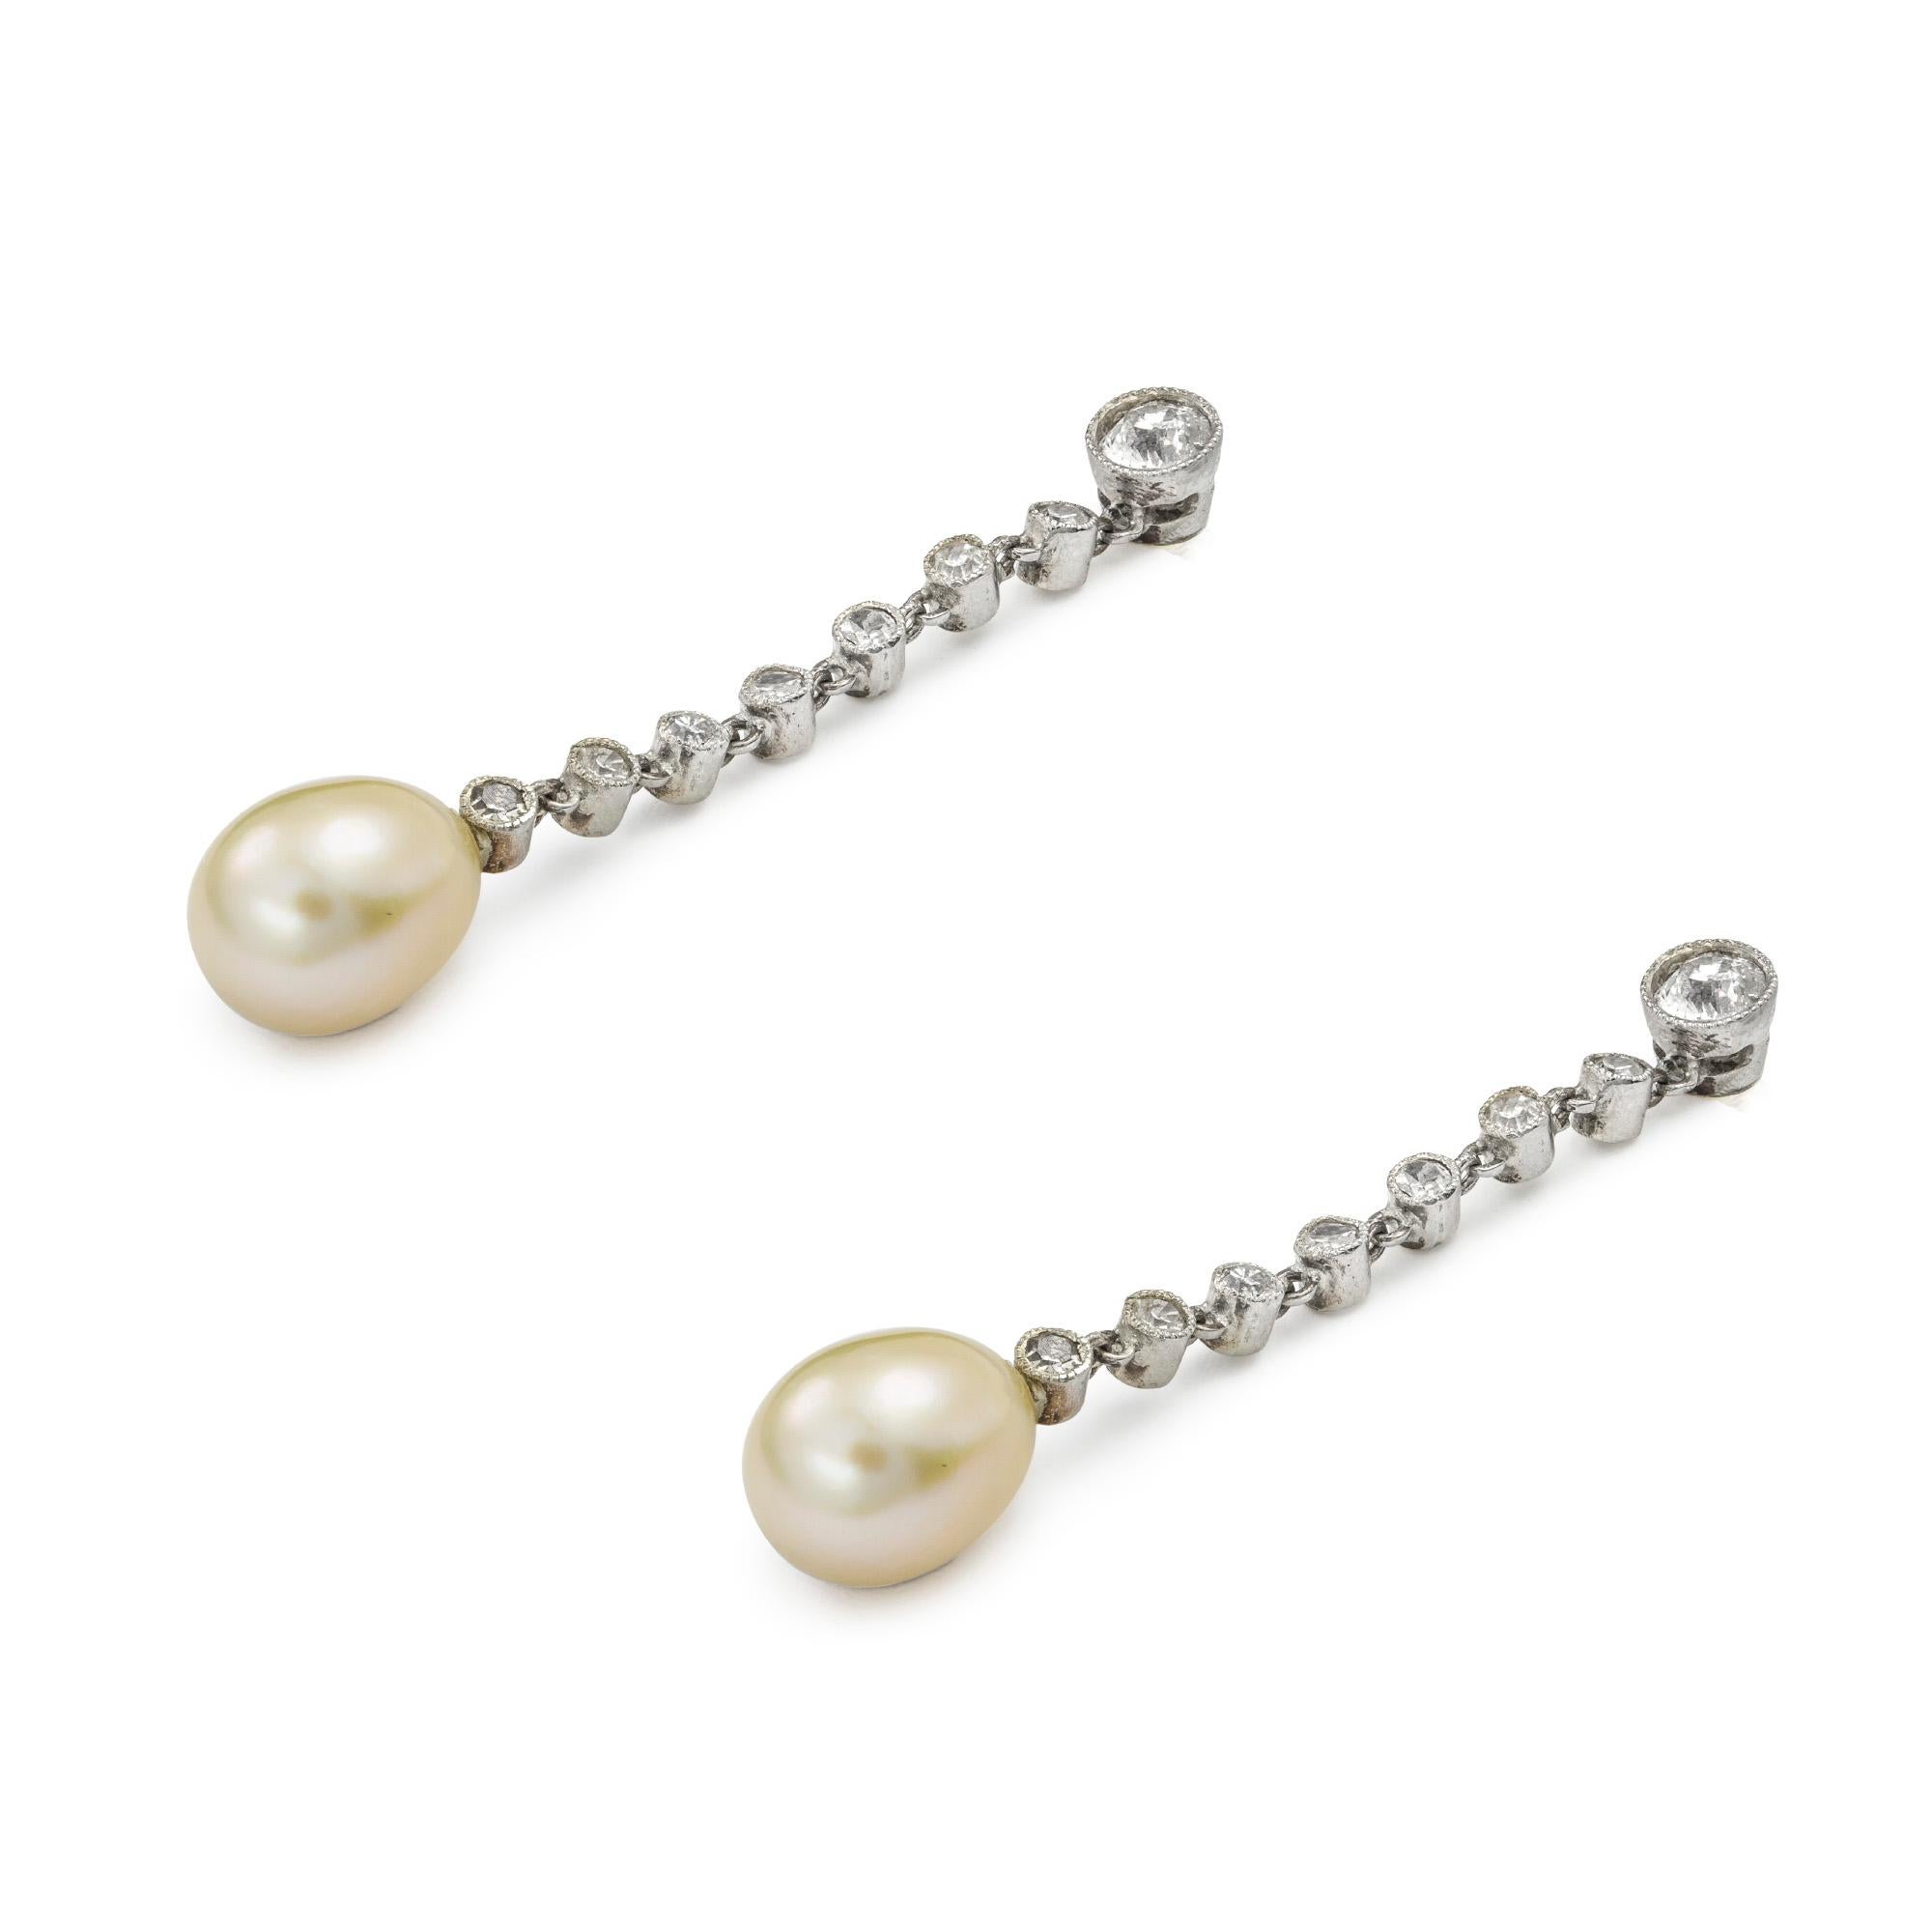 A pair of Edwardian pearl and diamond drop earrings, each earring with a tear-drop shaped pearl, accompanied by GCS report stating to be natural saltwater, suspended by a run of nine old European and Swiss-cut diamonds, the diamonds estimated to